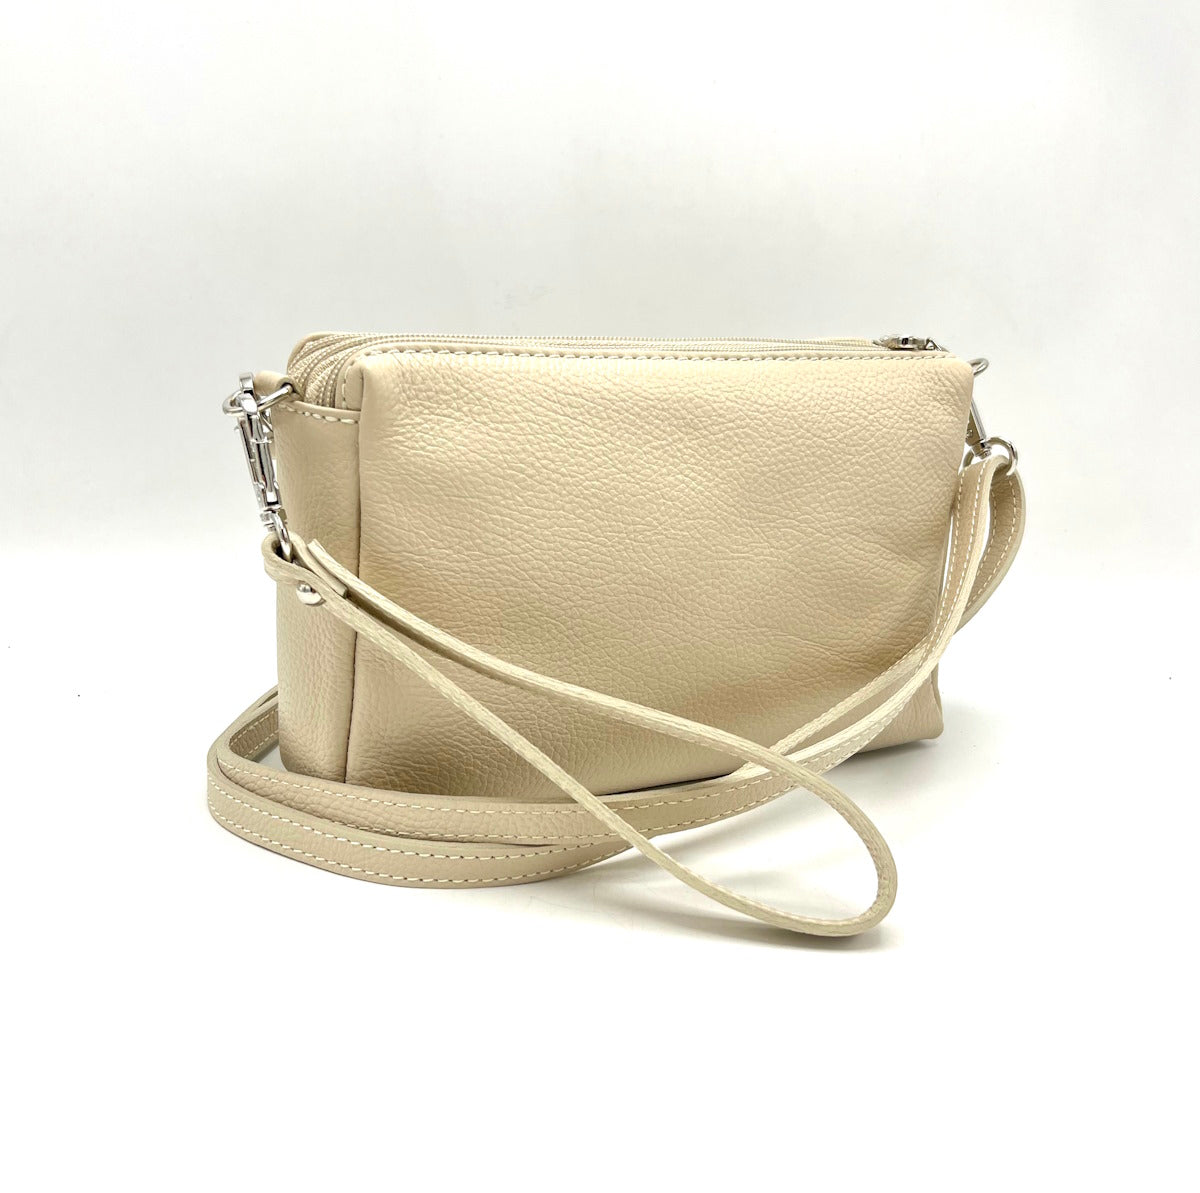 Genuine leather shoulder bag, Made in Italy, art. 112135